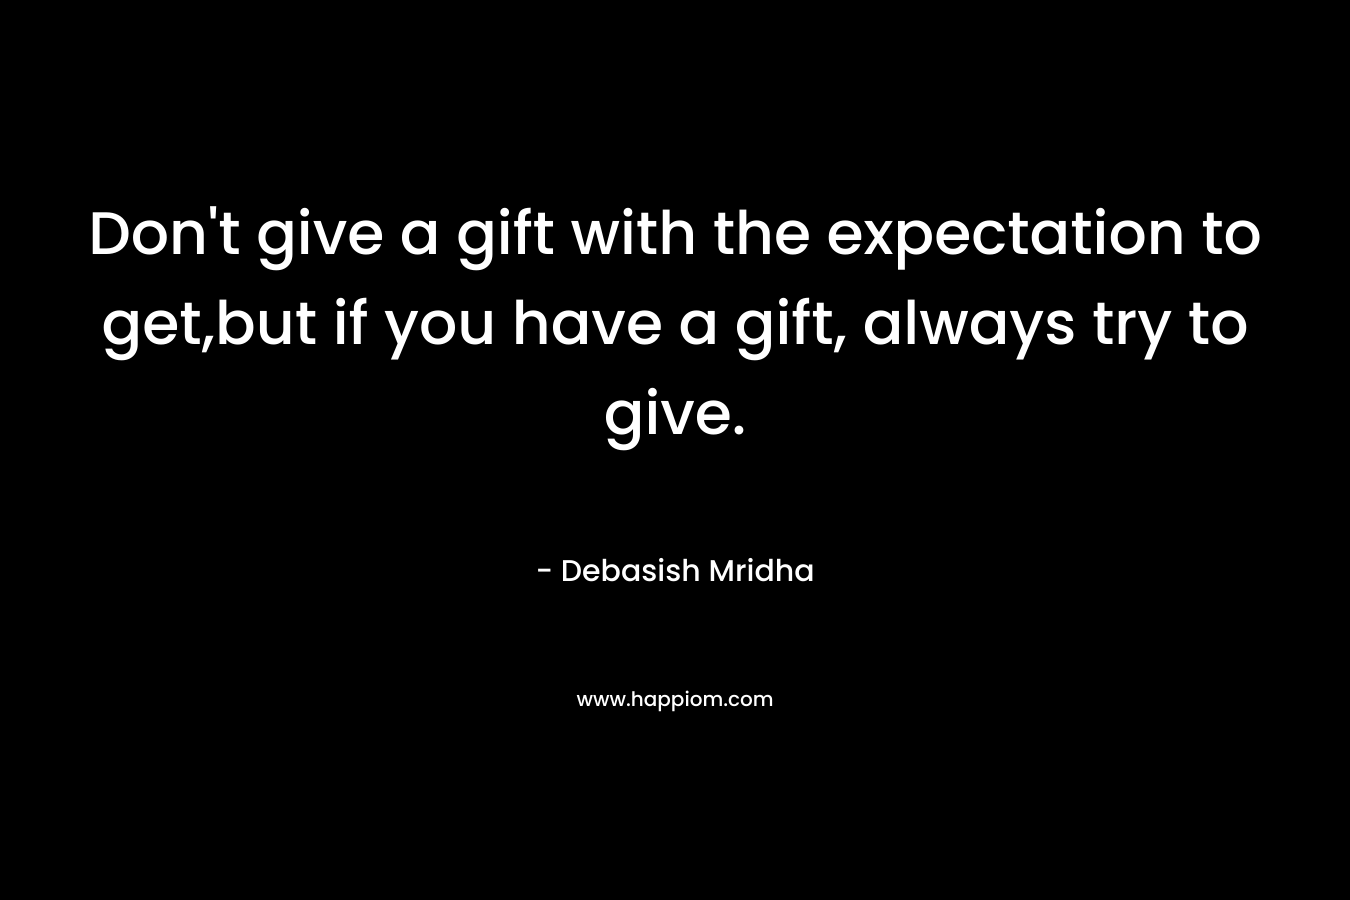 Don't give a gift with the expectation to get,but if you have a gift, always try to give.